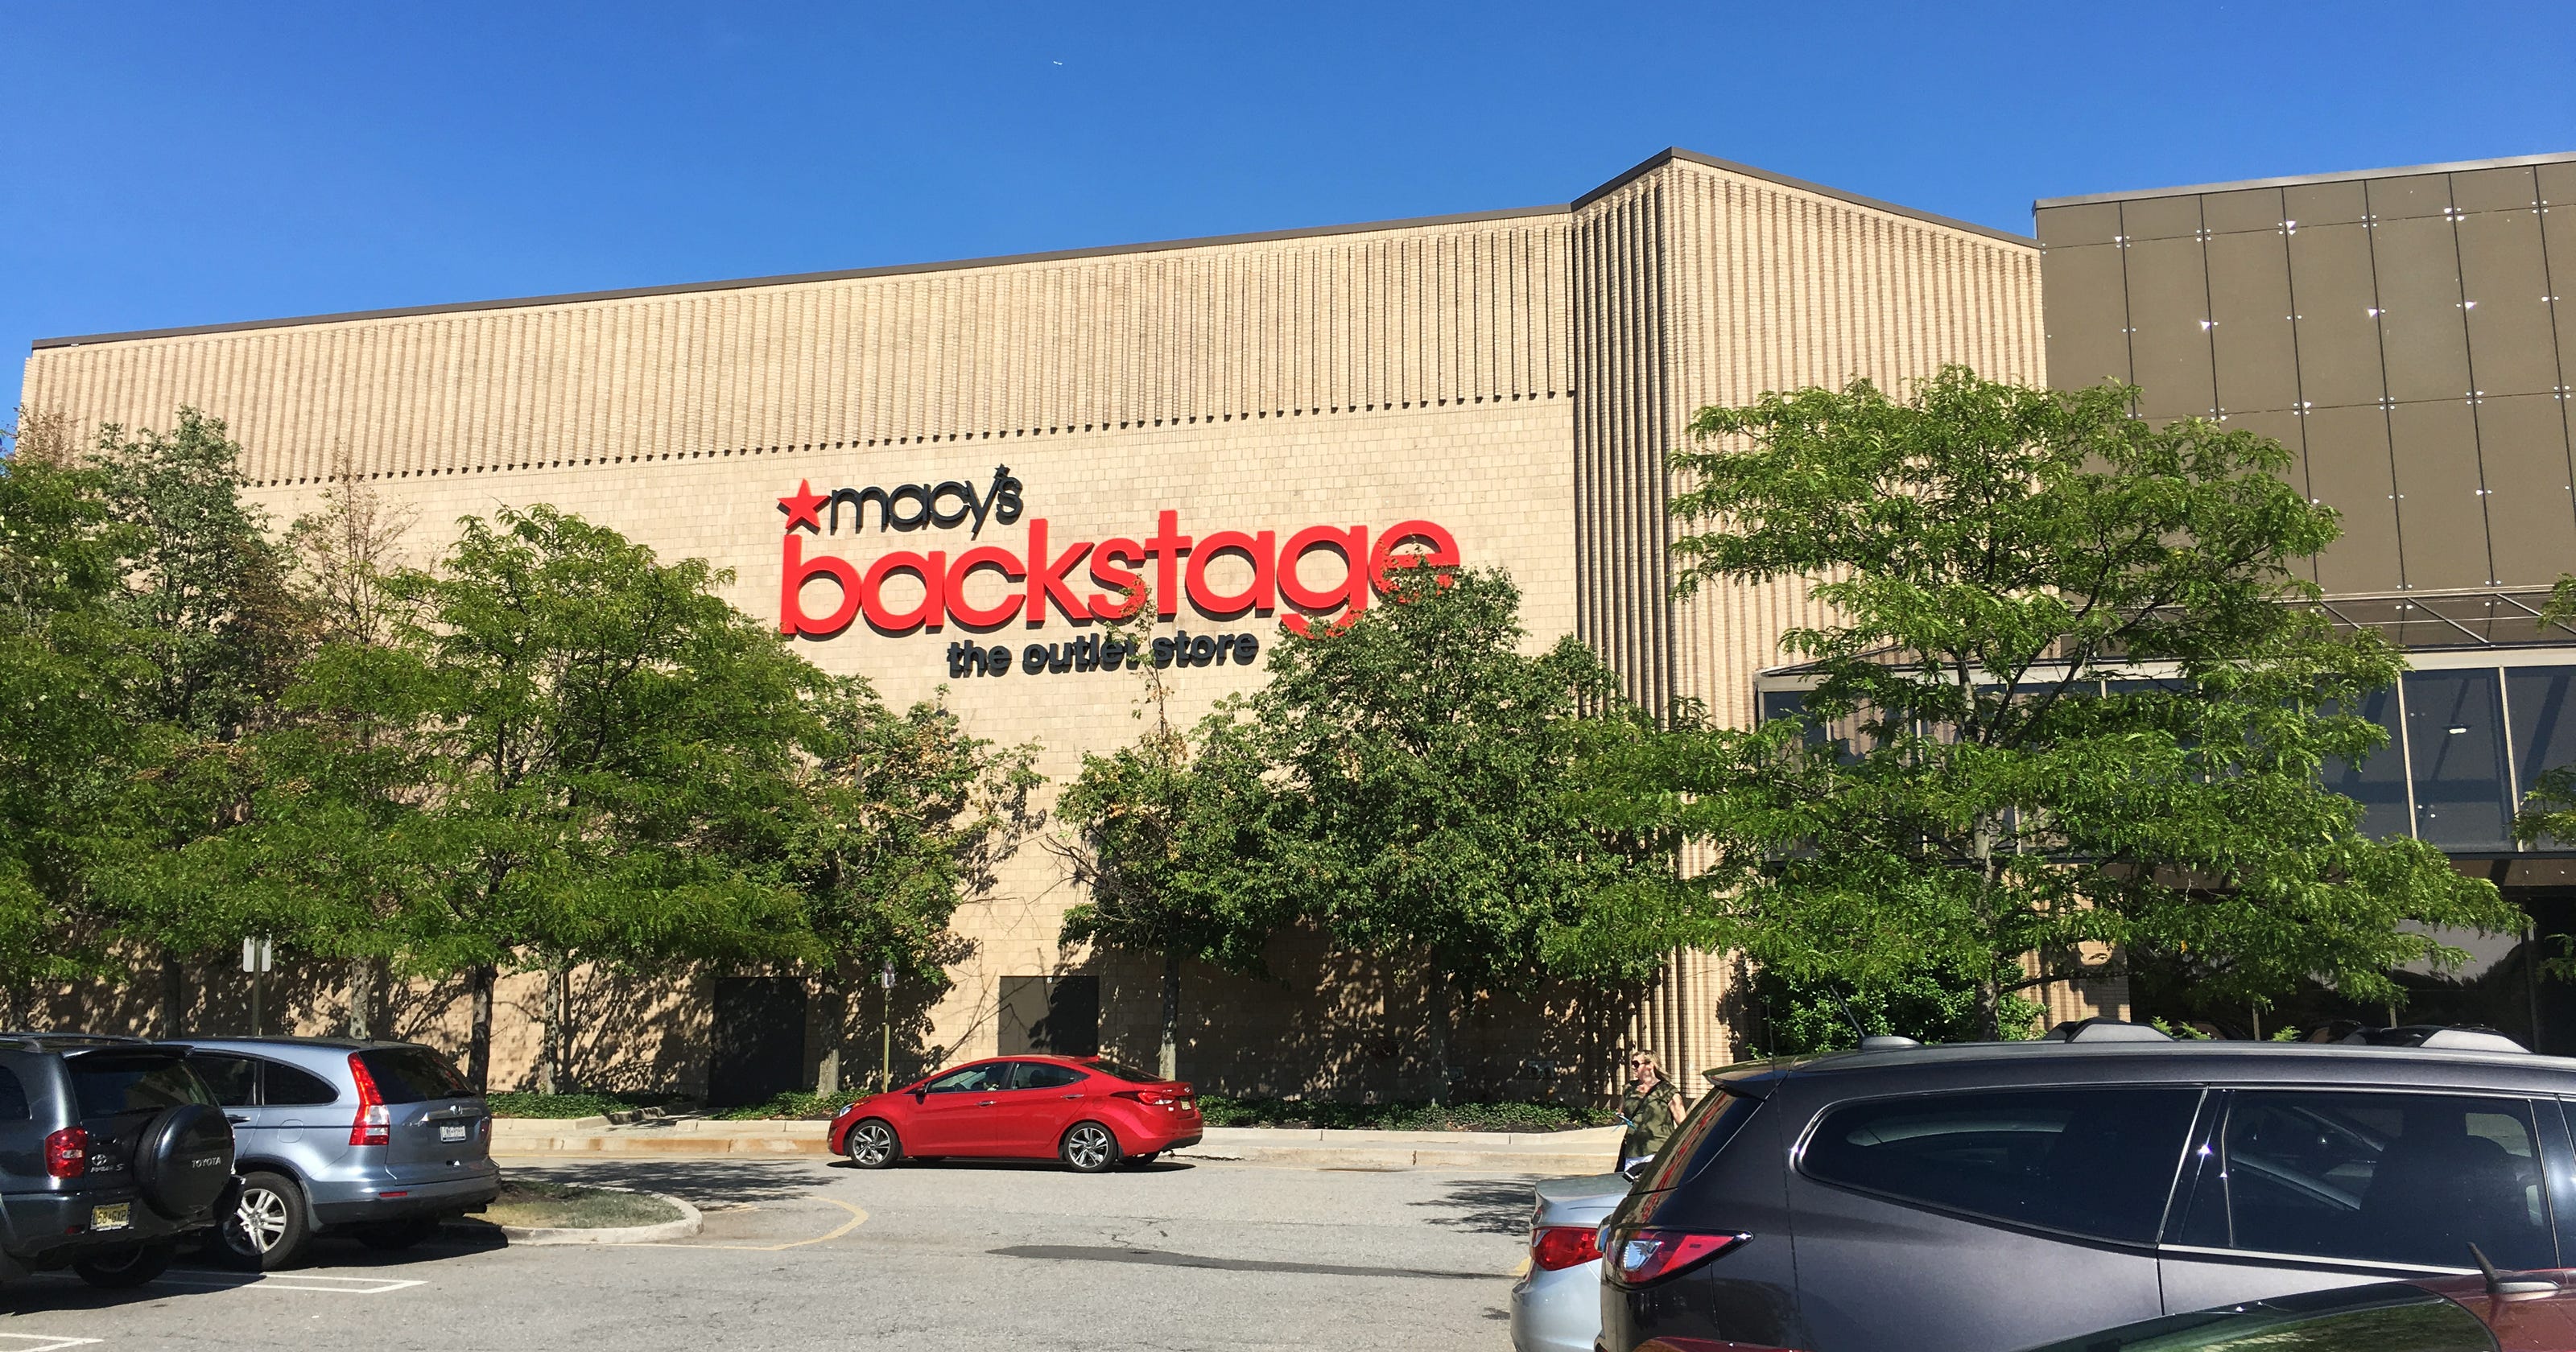 Macy&#39;s to open Backstage outlet store at Willowbrook Mall in Wayne NJ